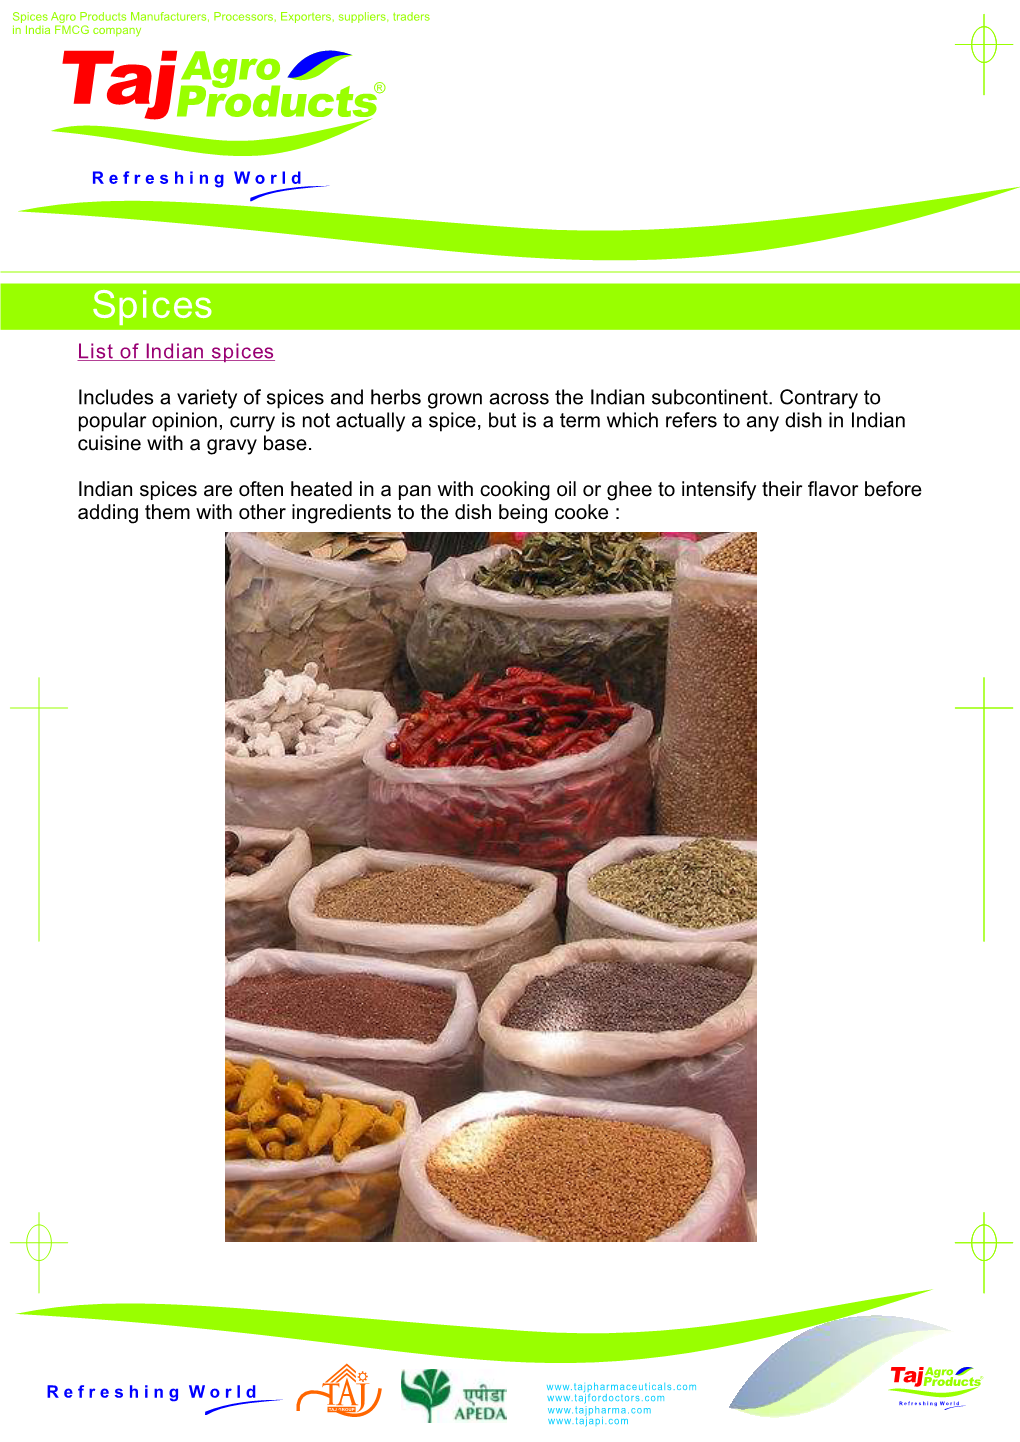 Spices Agro Products Manufacturers, Processors, Exporters, Suppliers, Traders in India FMCG Company Taj Agro Products®